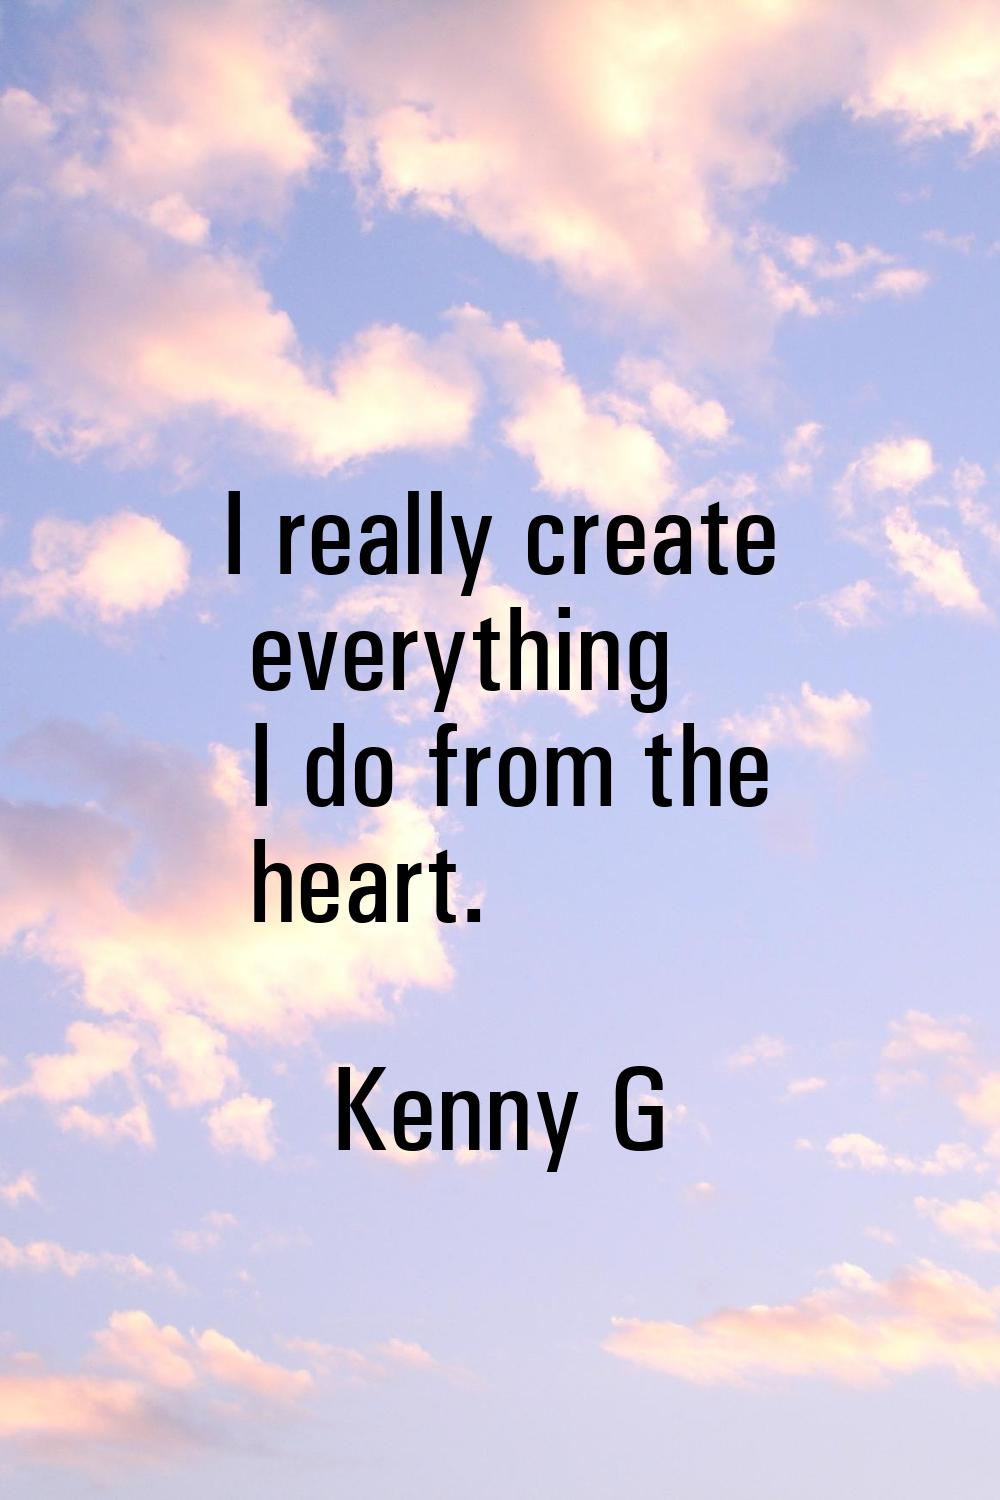 I really create everything I do from the heart.